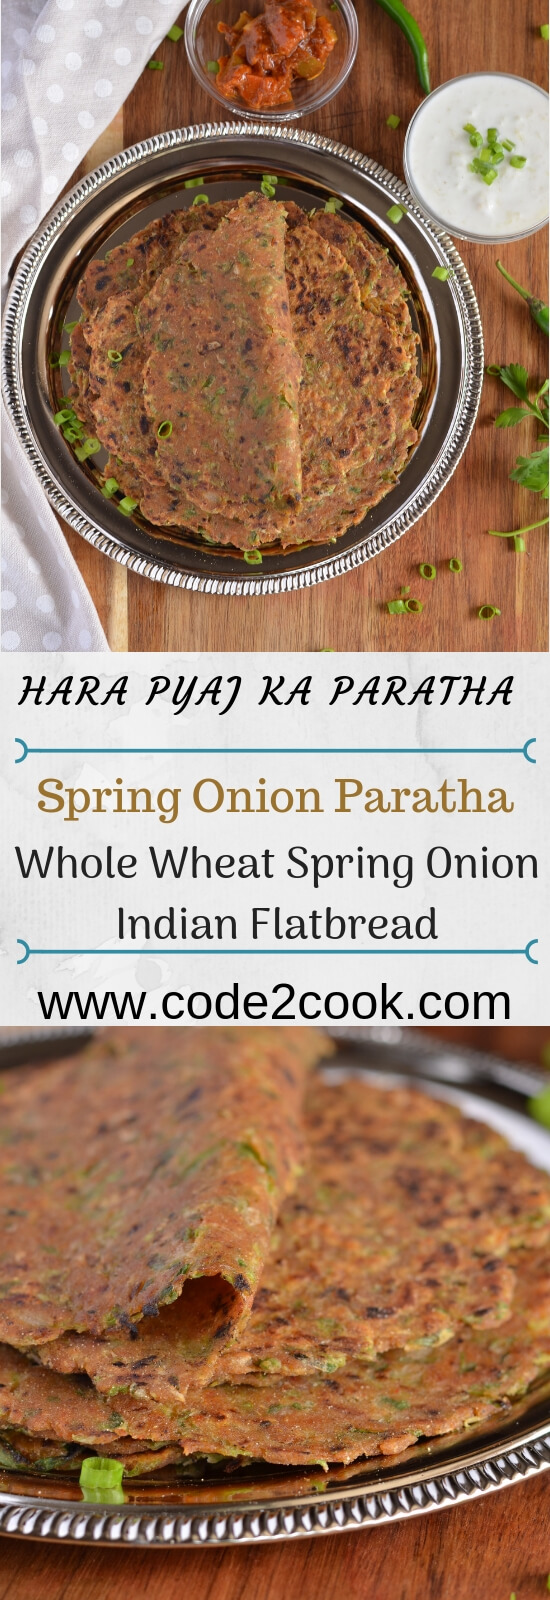 Hara pyaz ka paratha or spring onion paratha is another Indian flatbread recipe where vegetables and spices kneaded along with the whole wheat flour. Such parathas are easy to make, very quick process when compare to stuff parathas, and the best part is kids love these. Another breakfast option which is suitable for a kid's lunchbox too.